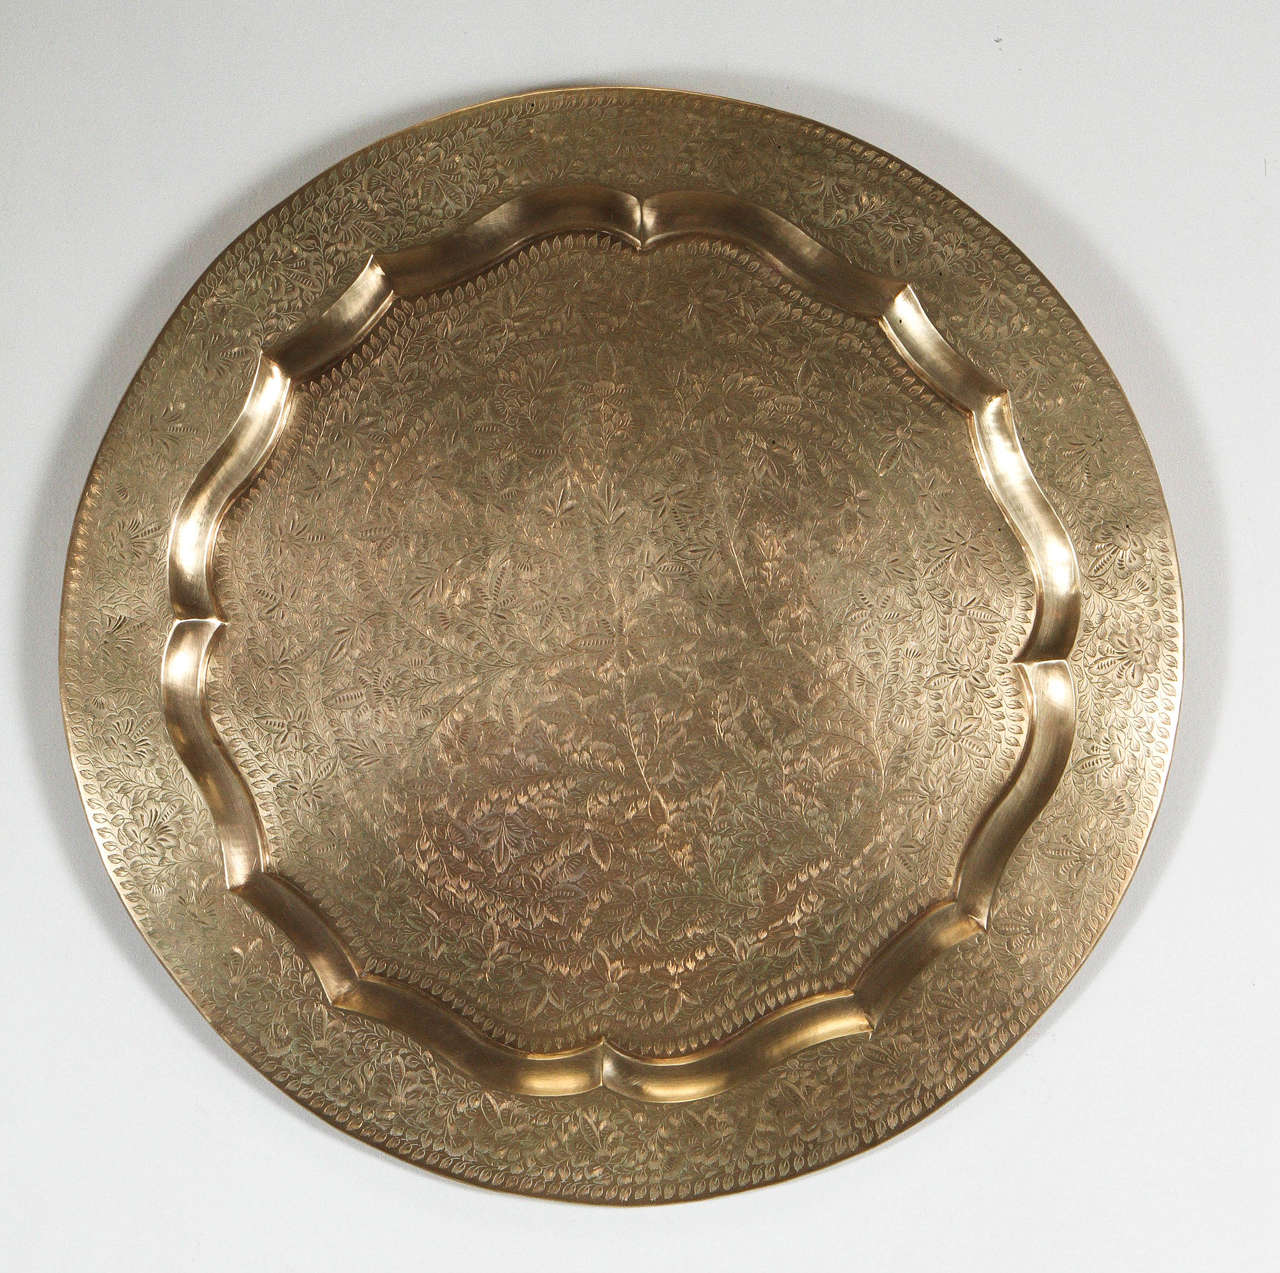 Anglo-Indian round brass tray wall hanging, amazing artwork, very finely hand-hammered.
Has a hook in the back for hanging.
You can also use it as a serving platter or on an ottoman, or as a brass tray table.
Made in India Anglo Raj hand-engraved